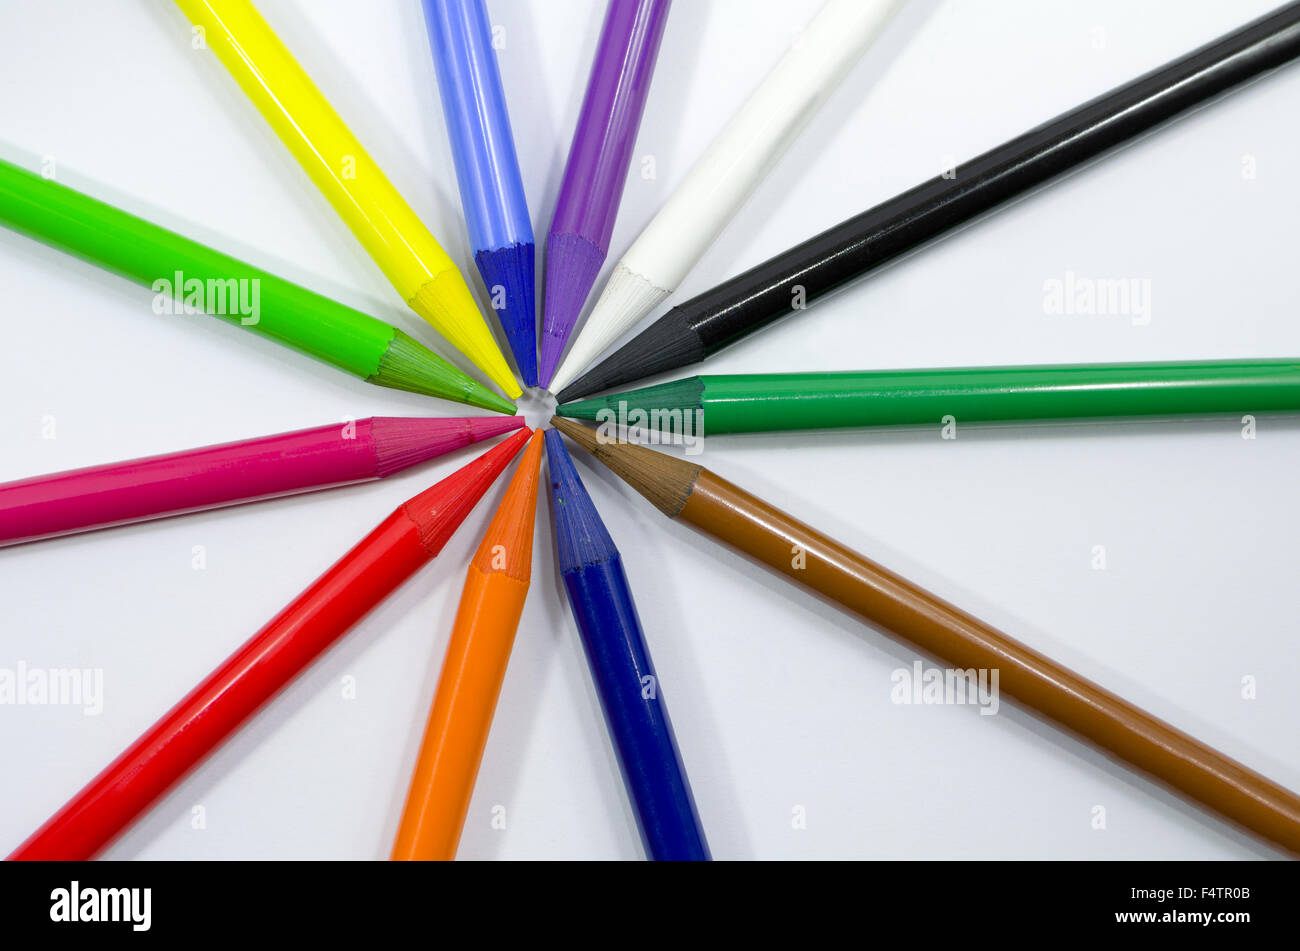 Woodless Colored Pencils Arranged in Circle Closeup Stock Photo